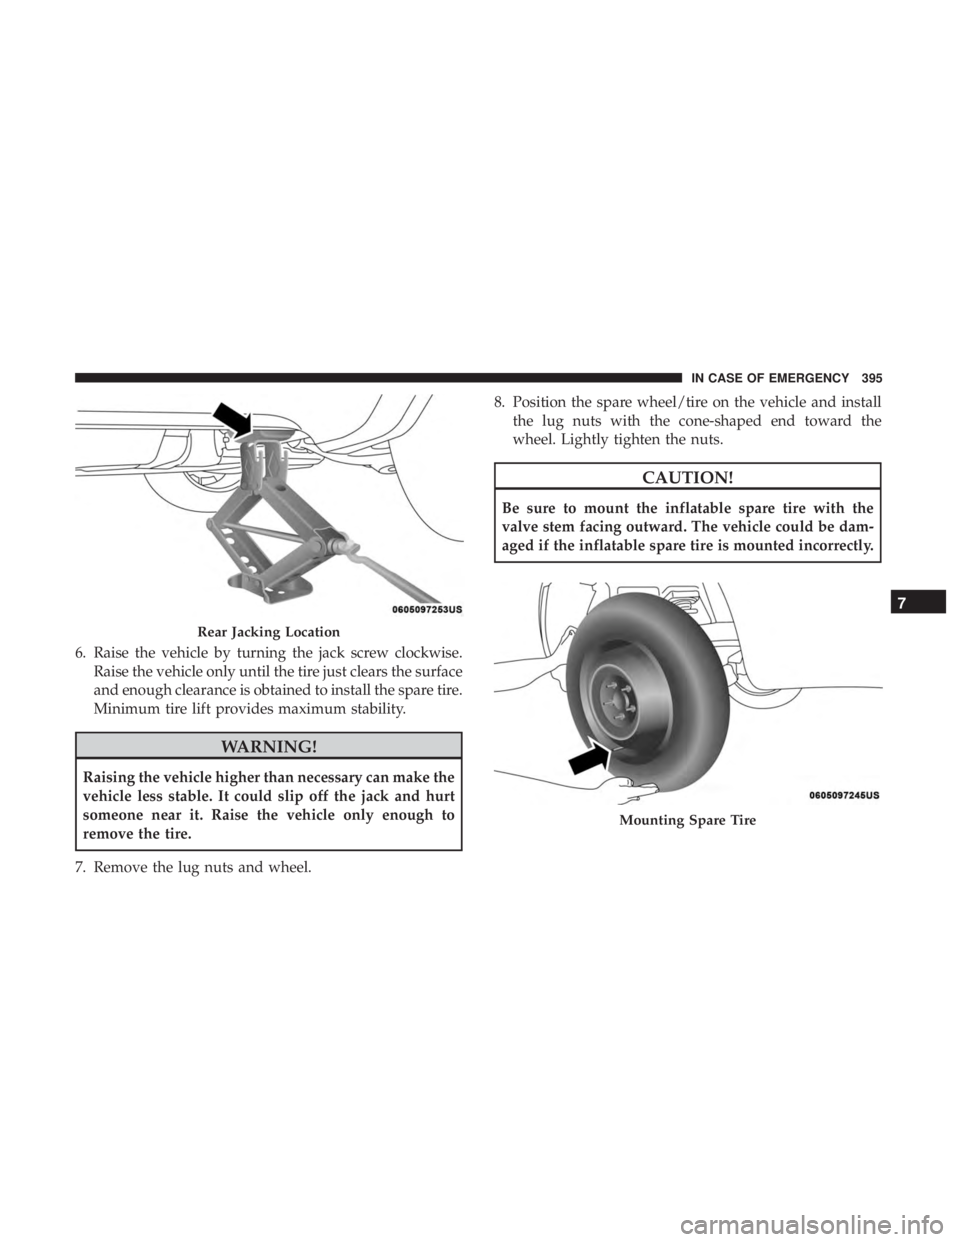 JEEP GRAND CHEROKEE SRT 2017  Owners Manual 6. Raise the vehicle by turning the jack screw clockwise.Raise the vehicle only until the tire just clears the surface
and enough clearance is obtained to install the spare tire.
Minimum tire lift pro